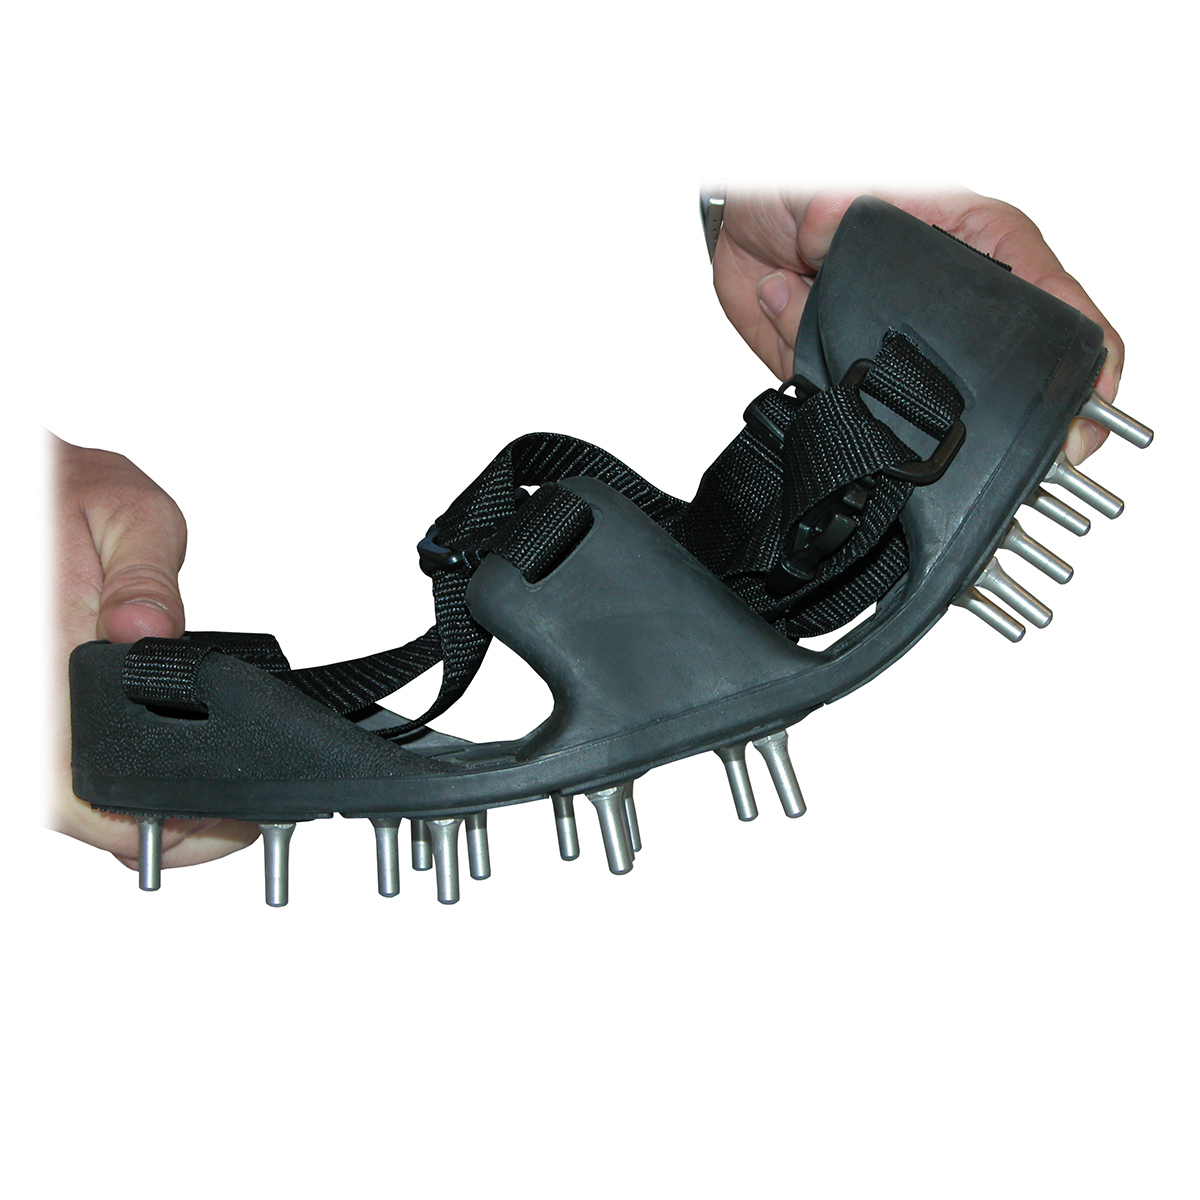 Flexible Bed Spiked Shoes with 7/8 Rounded Tip Spikes - XL (Shoe Size 12 -  13-1/2)